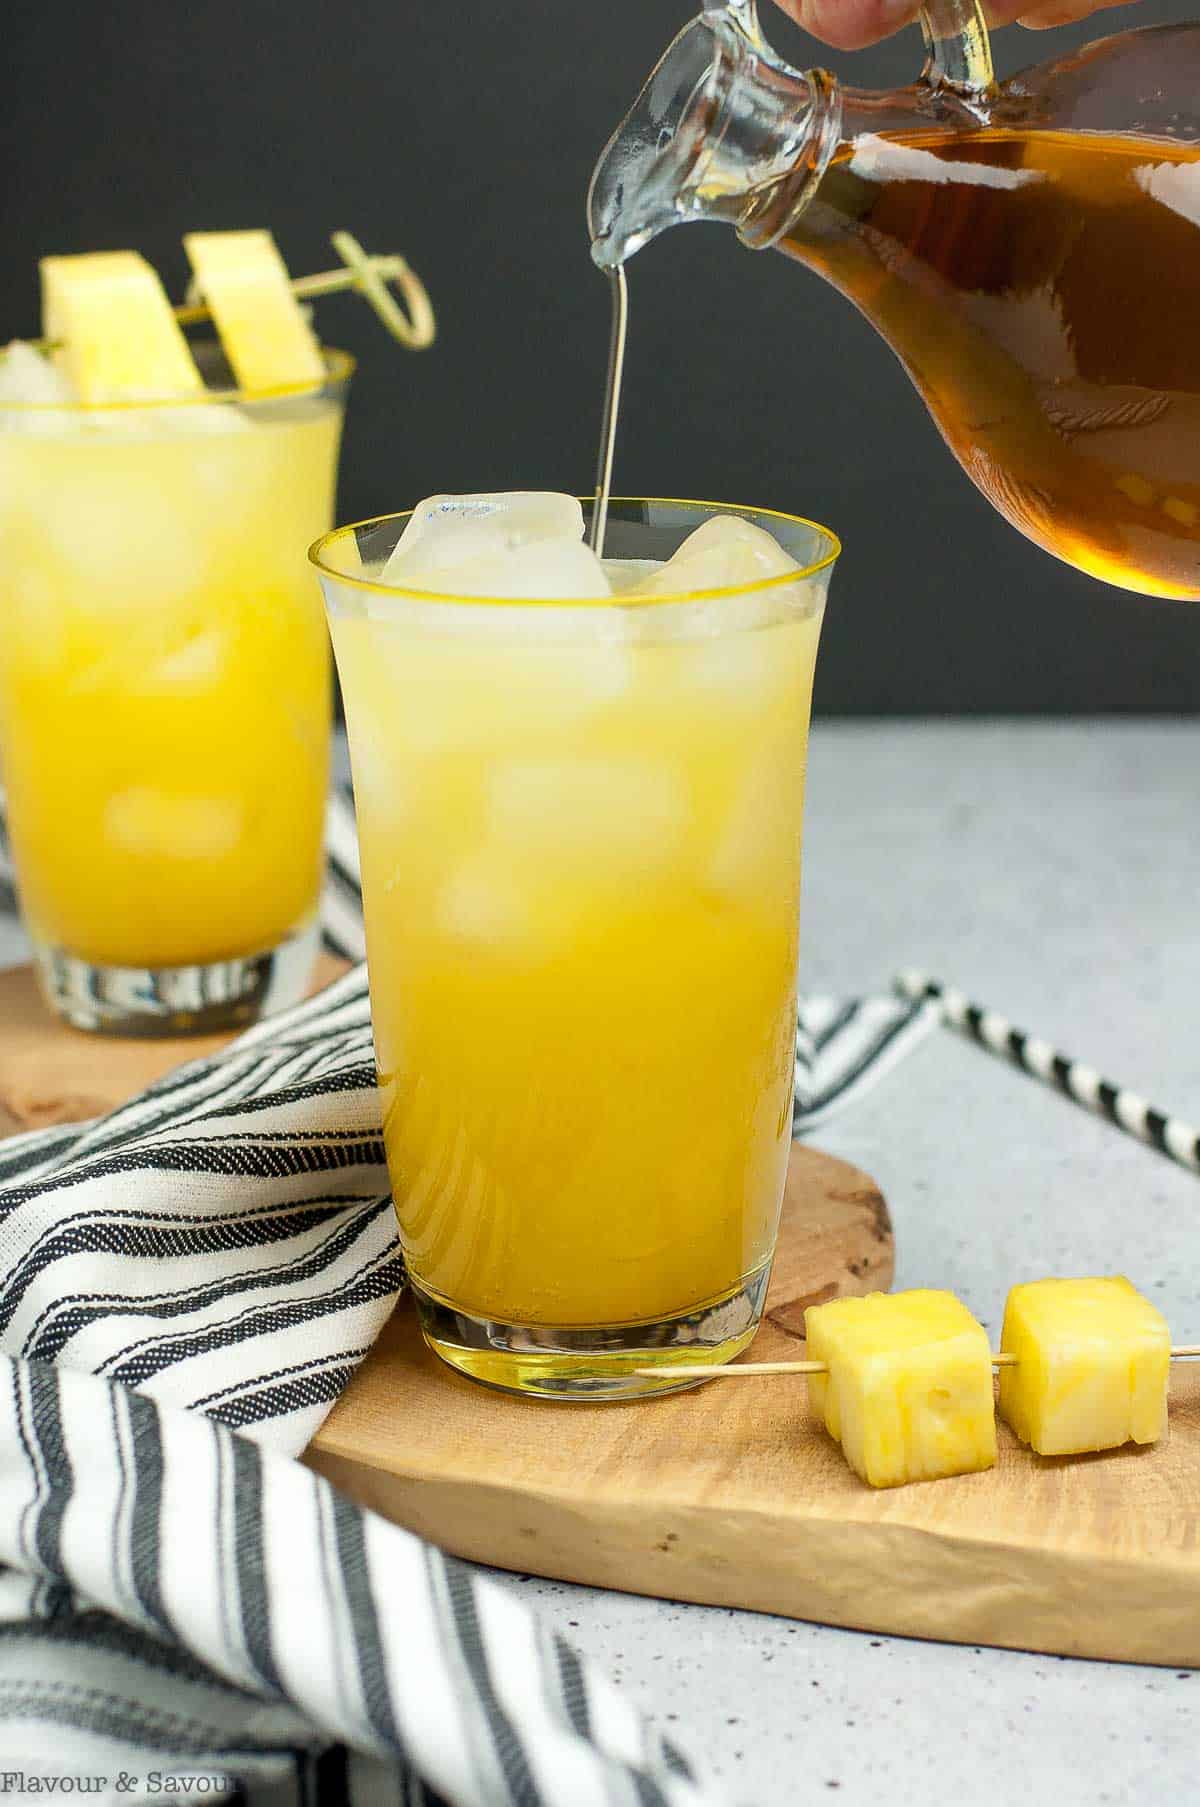 Pouring a tablespoon of cinnamon simple syrup into a glass of pineapple ginger mocktail.